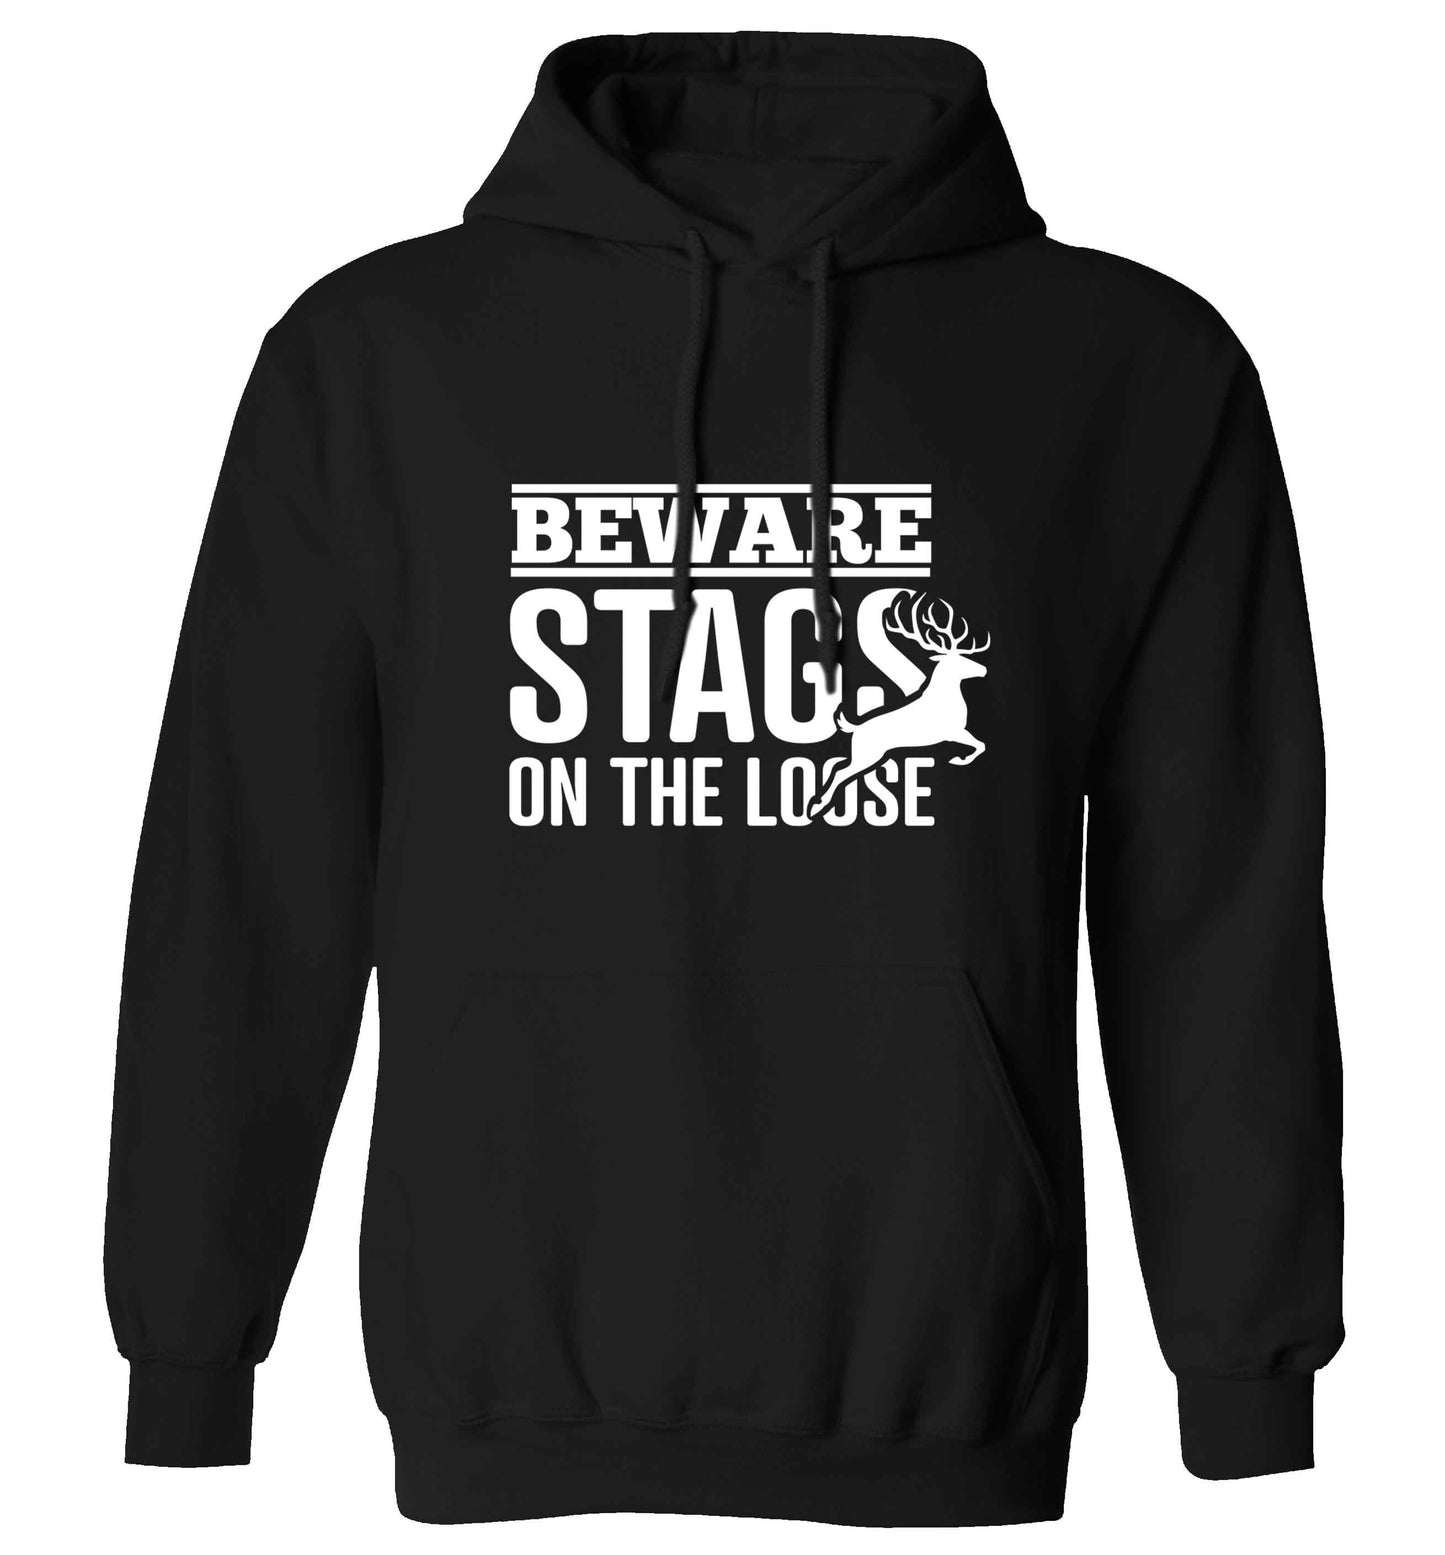 Beware stags on the loose adults unisex black hoodie 2XL